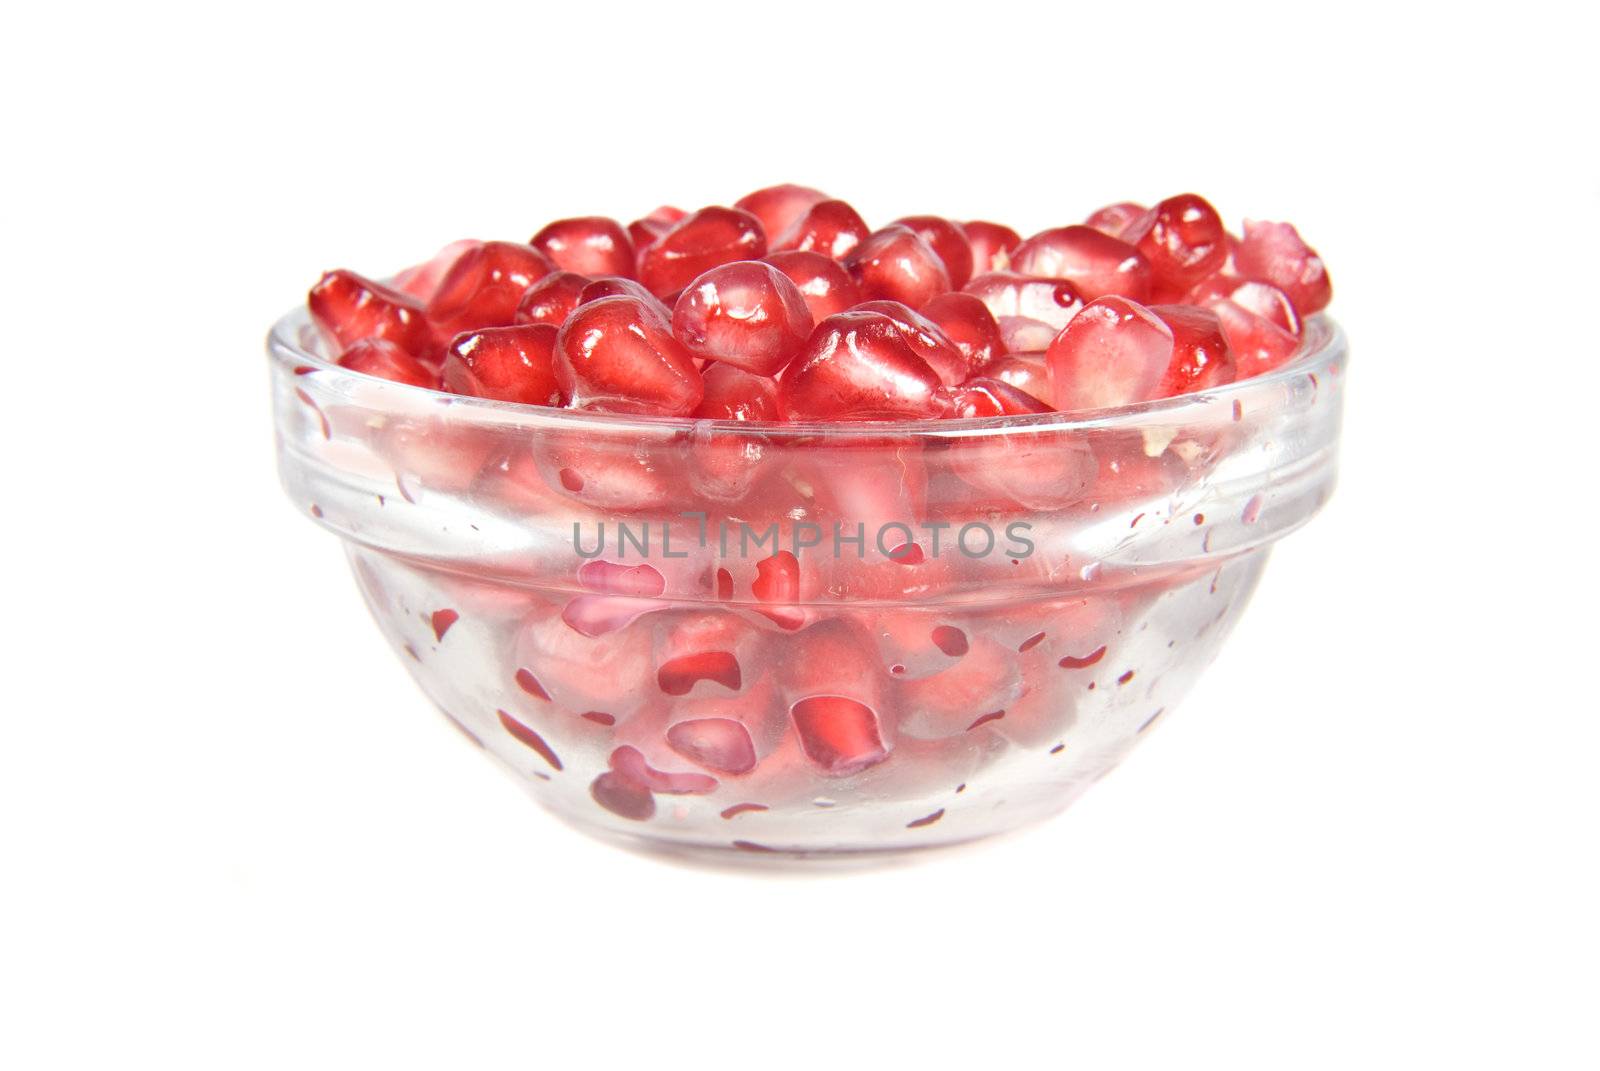 Pomegranate fruit and pips